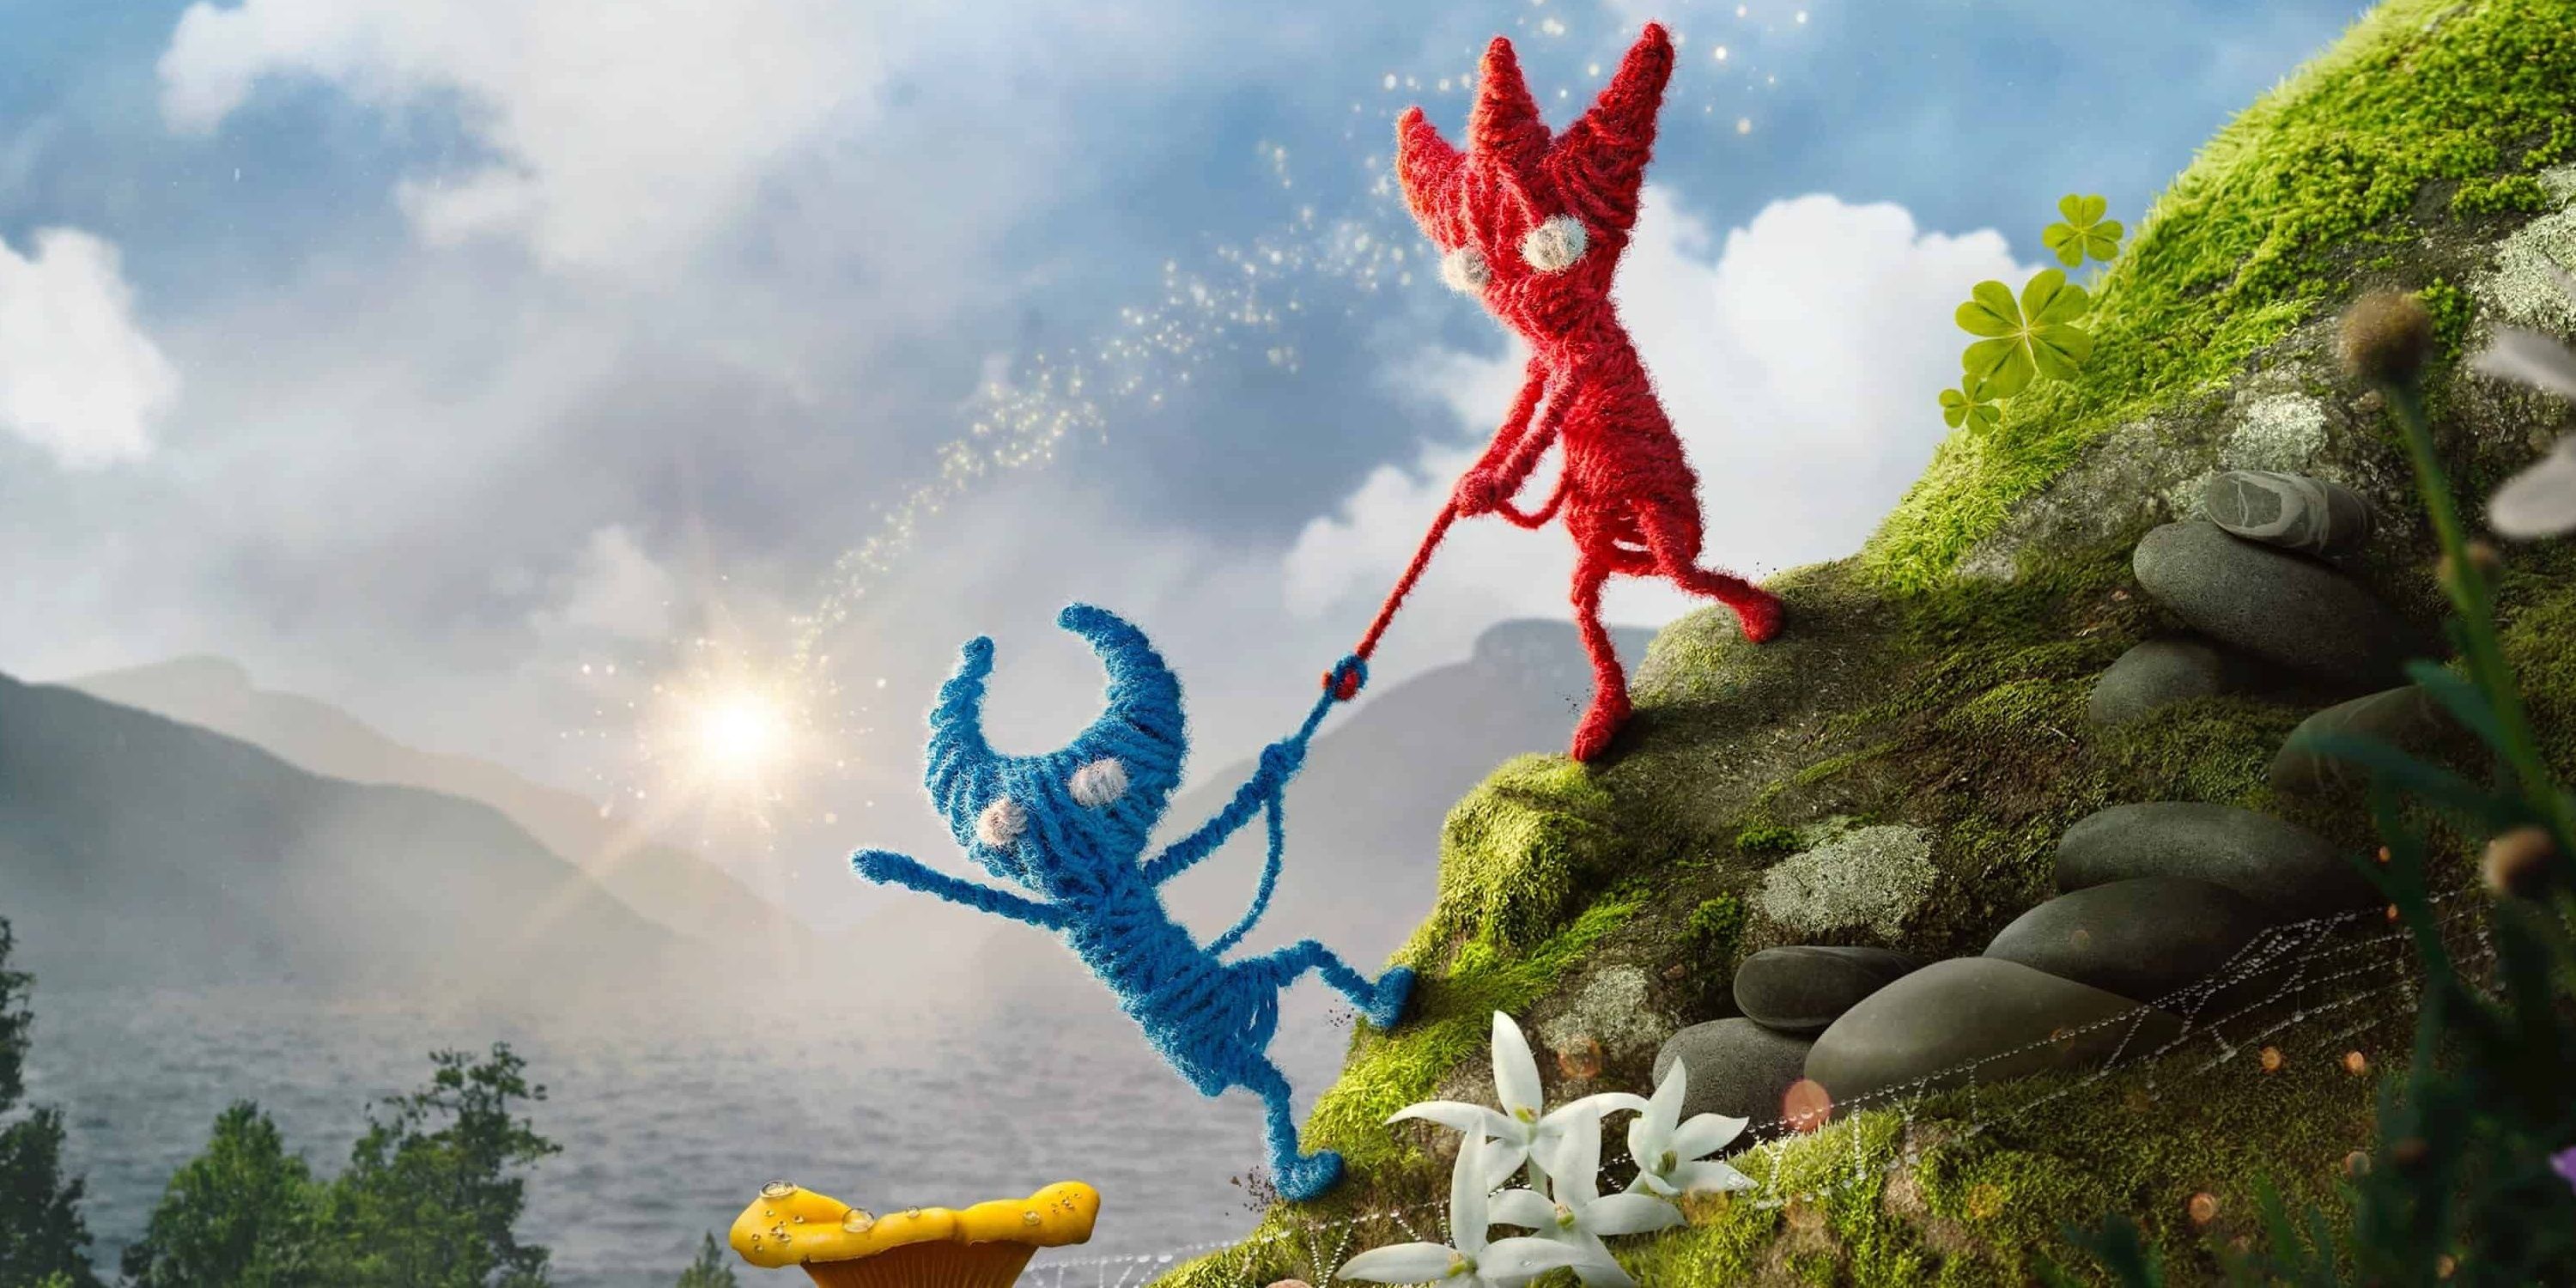 game art of two yarn creatures from Unravel 2